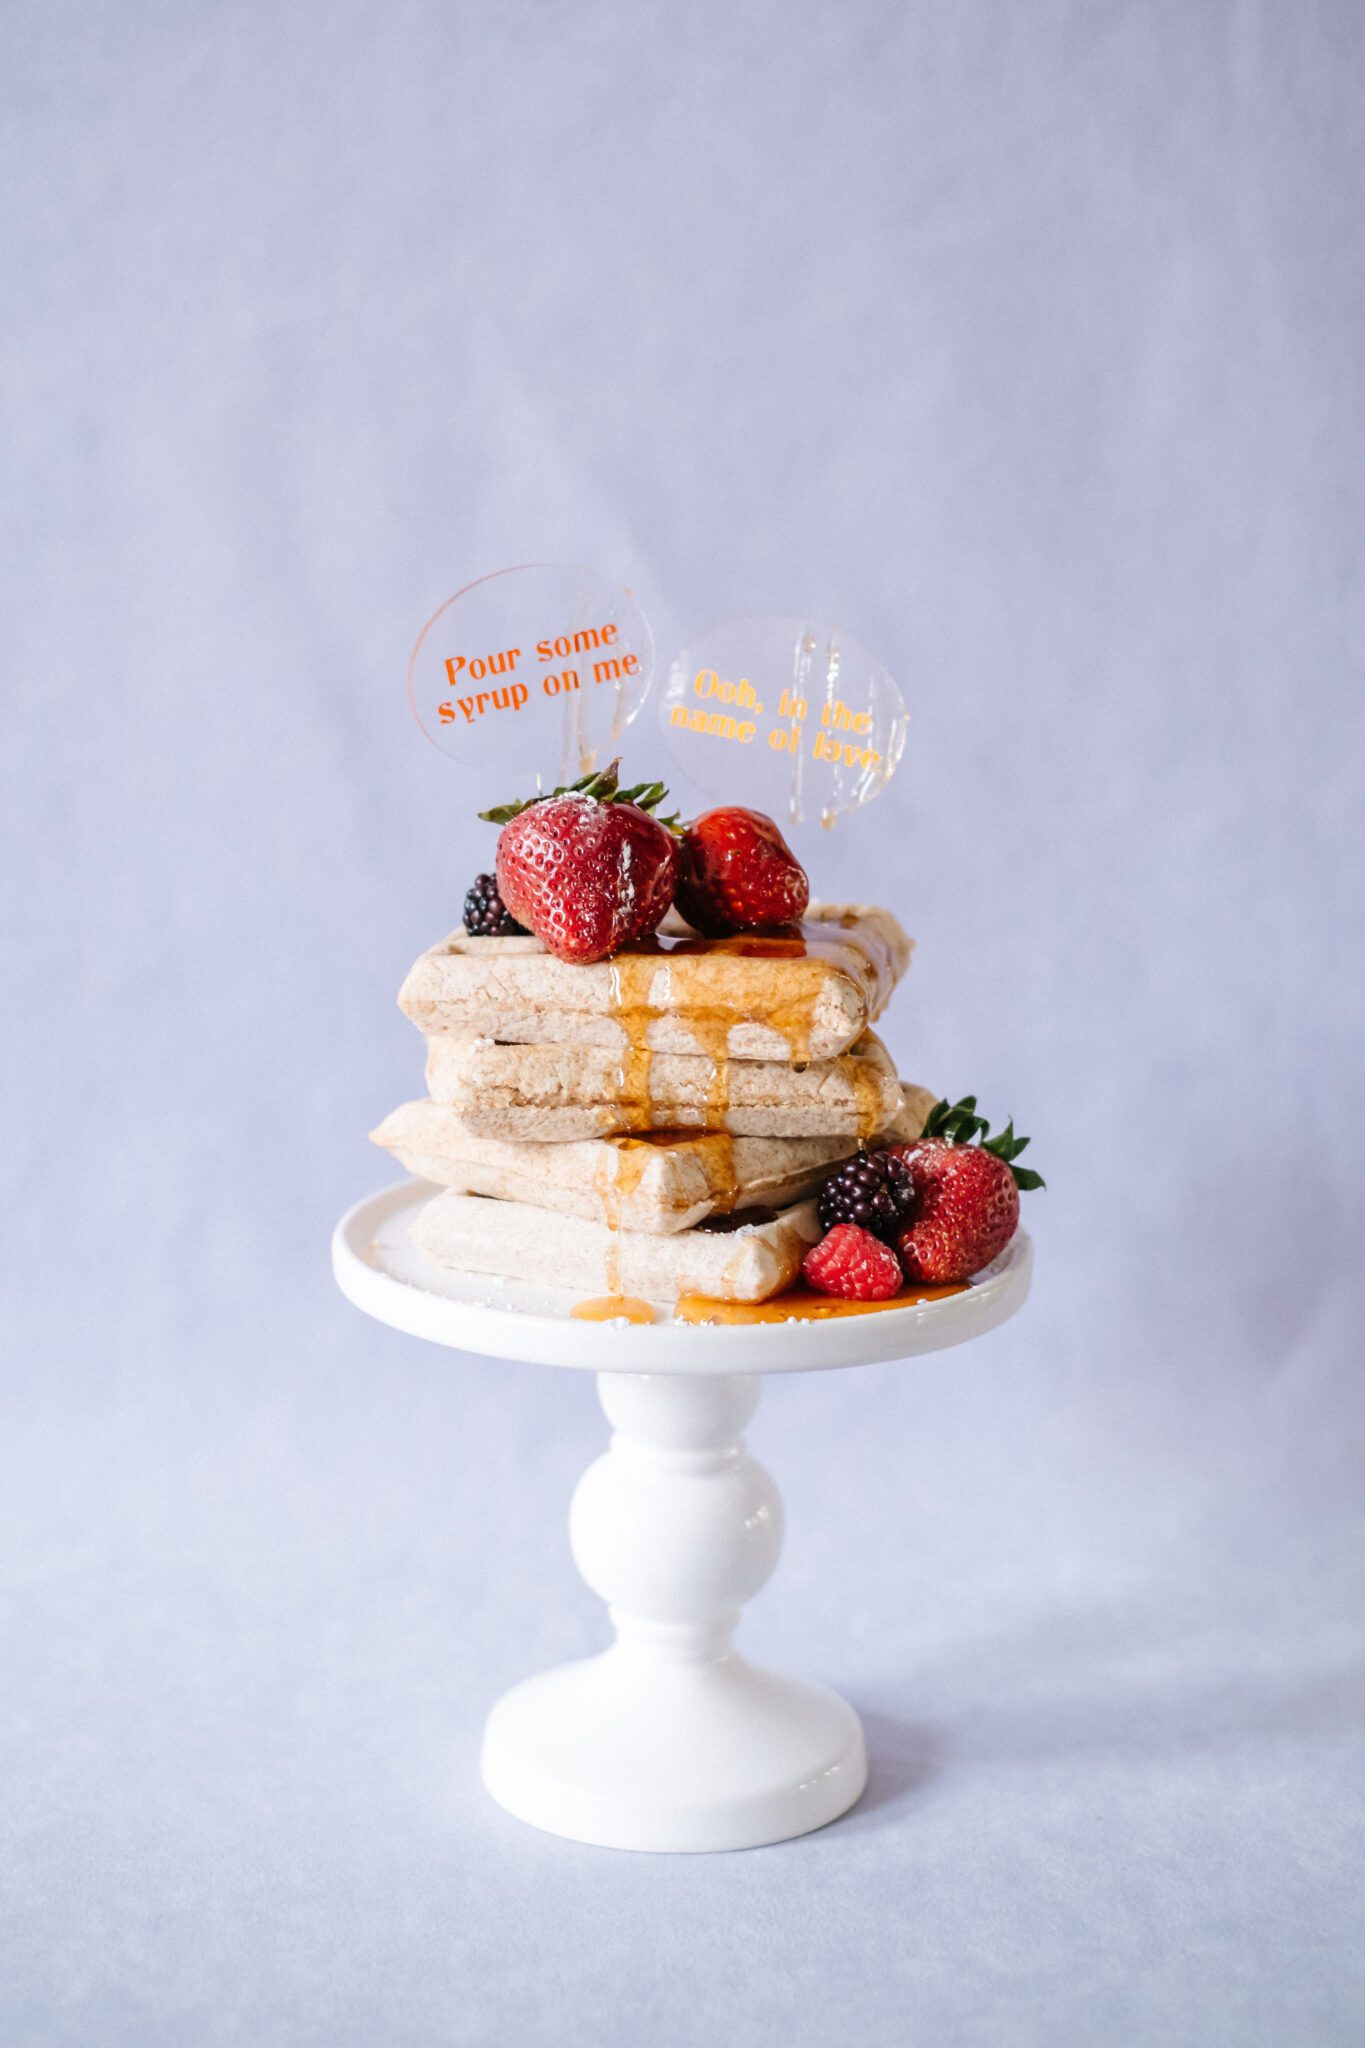 Bright and colourful wedding at The Brownstone Calgary, brunch wedding inspiration that combines mod style with retro decor. Tangerine and purple colour scheme menu featuring waffles and berries.